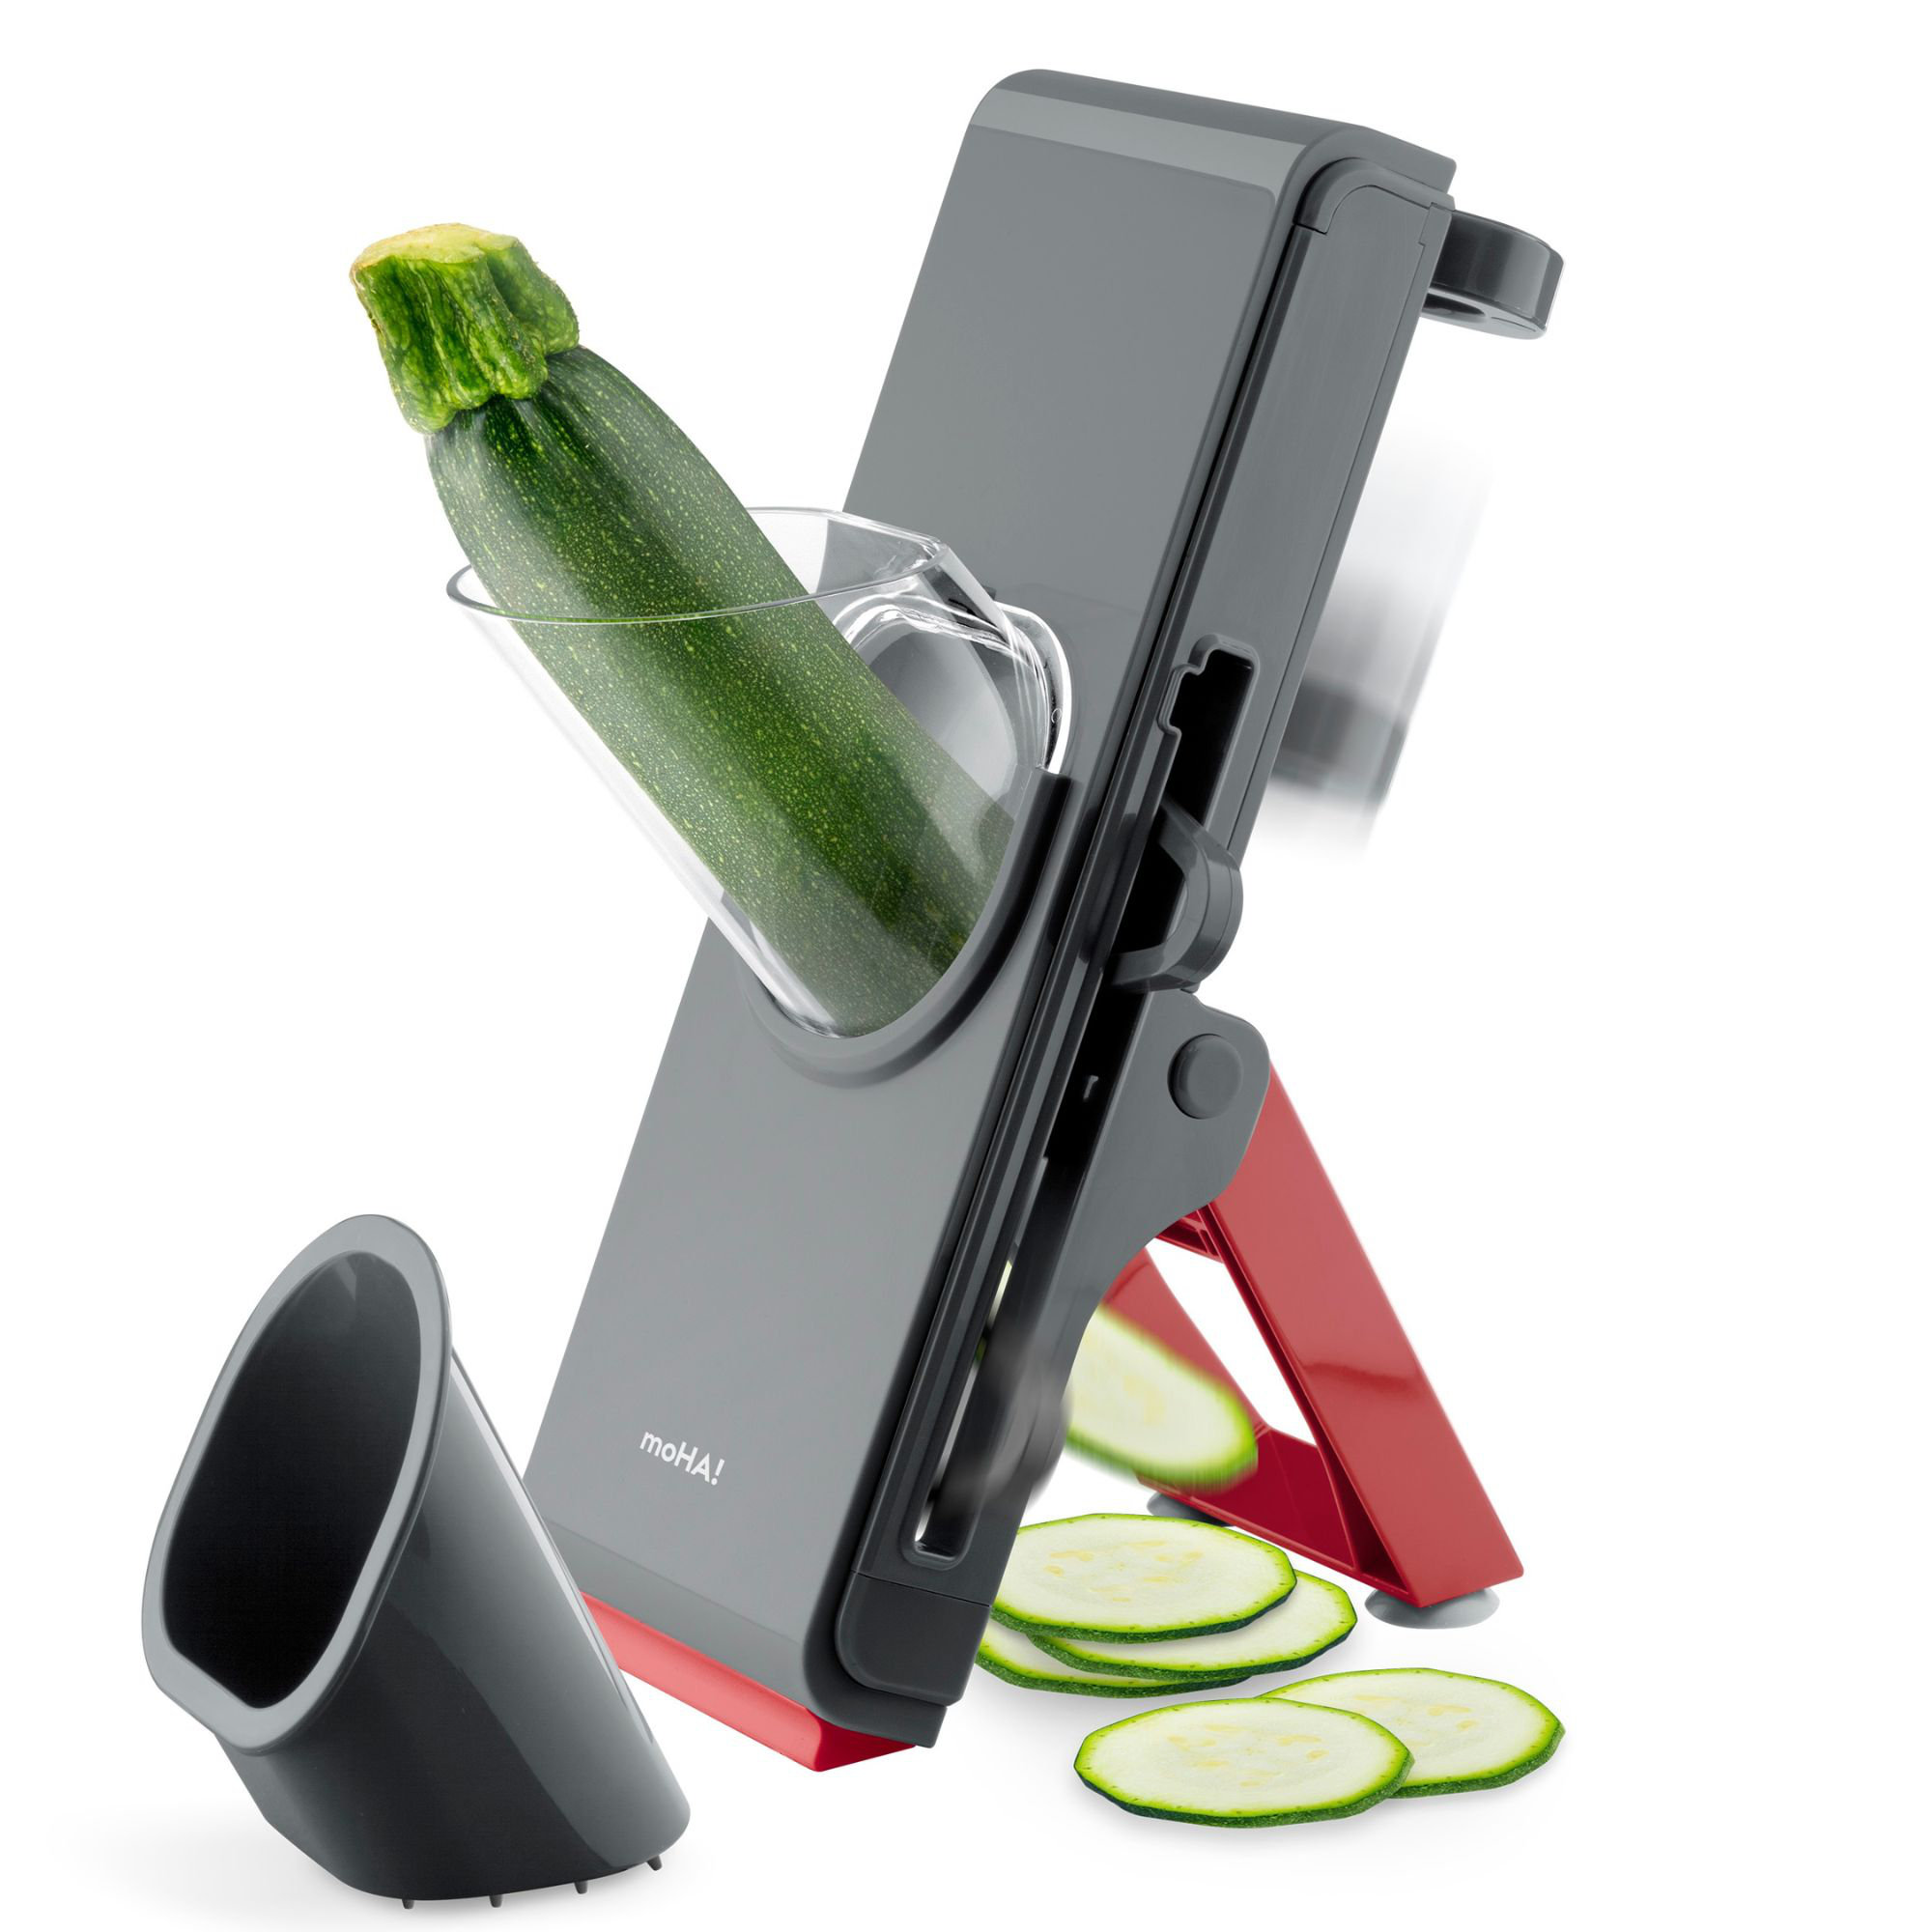 Platinum Stainless Steel And Plastic 6 In 1 Vegetable Slicer, for Kitchen